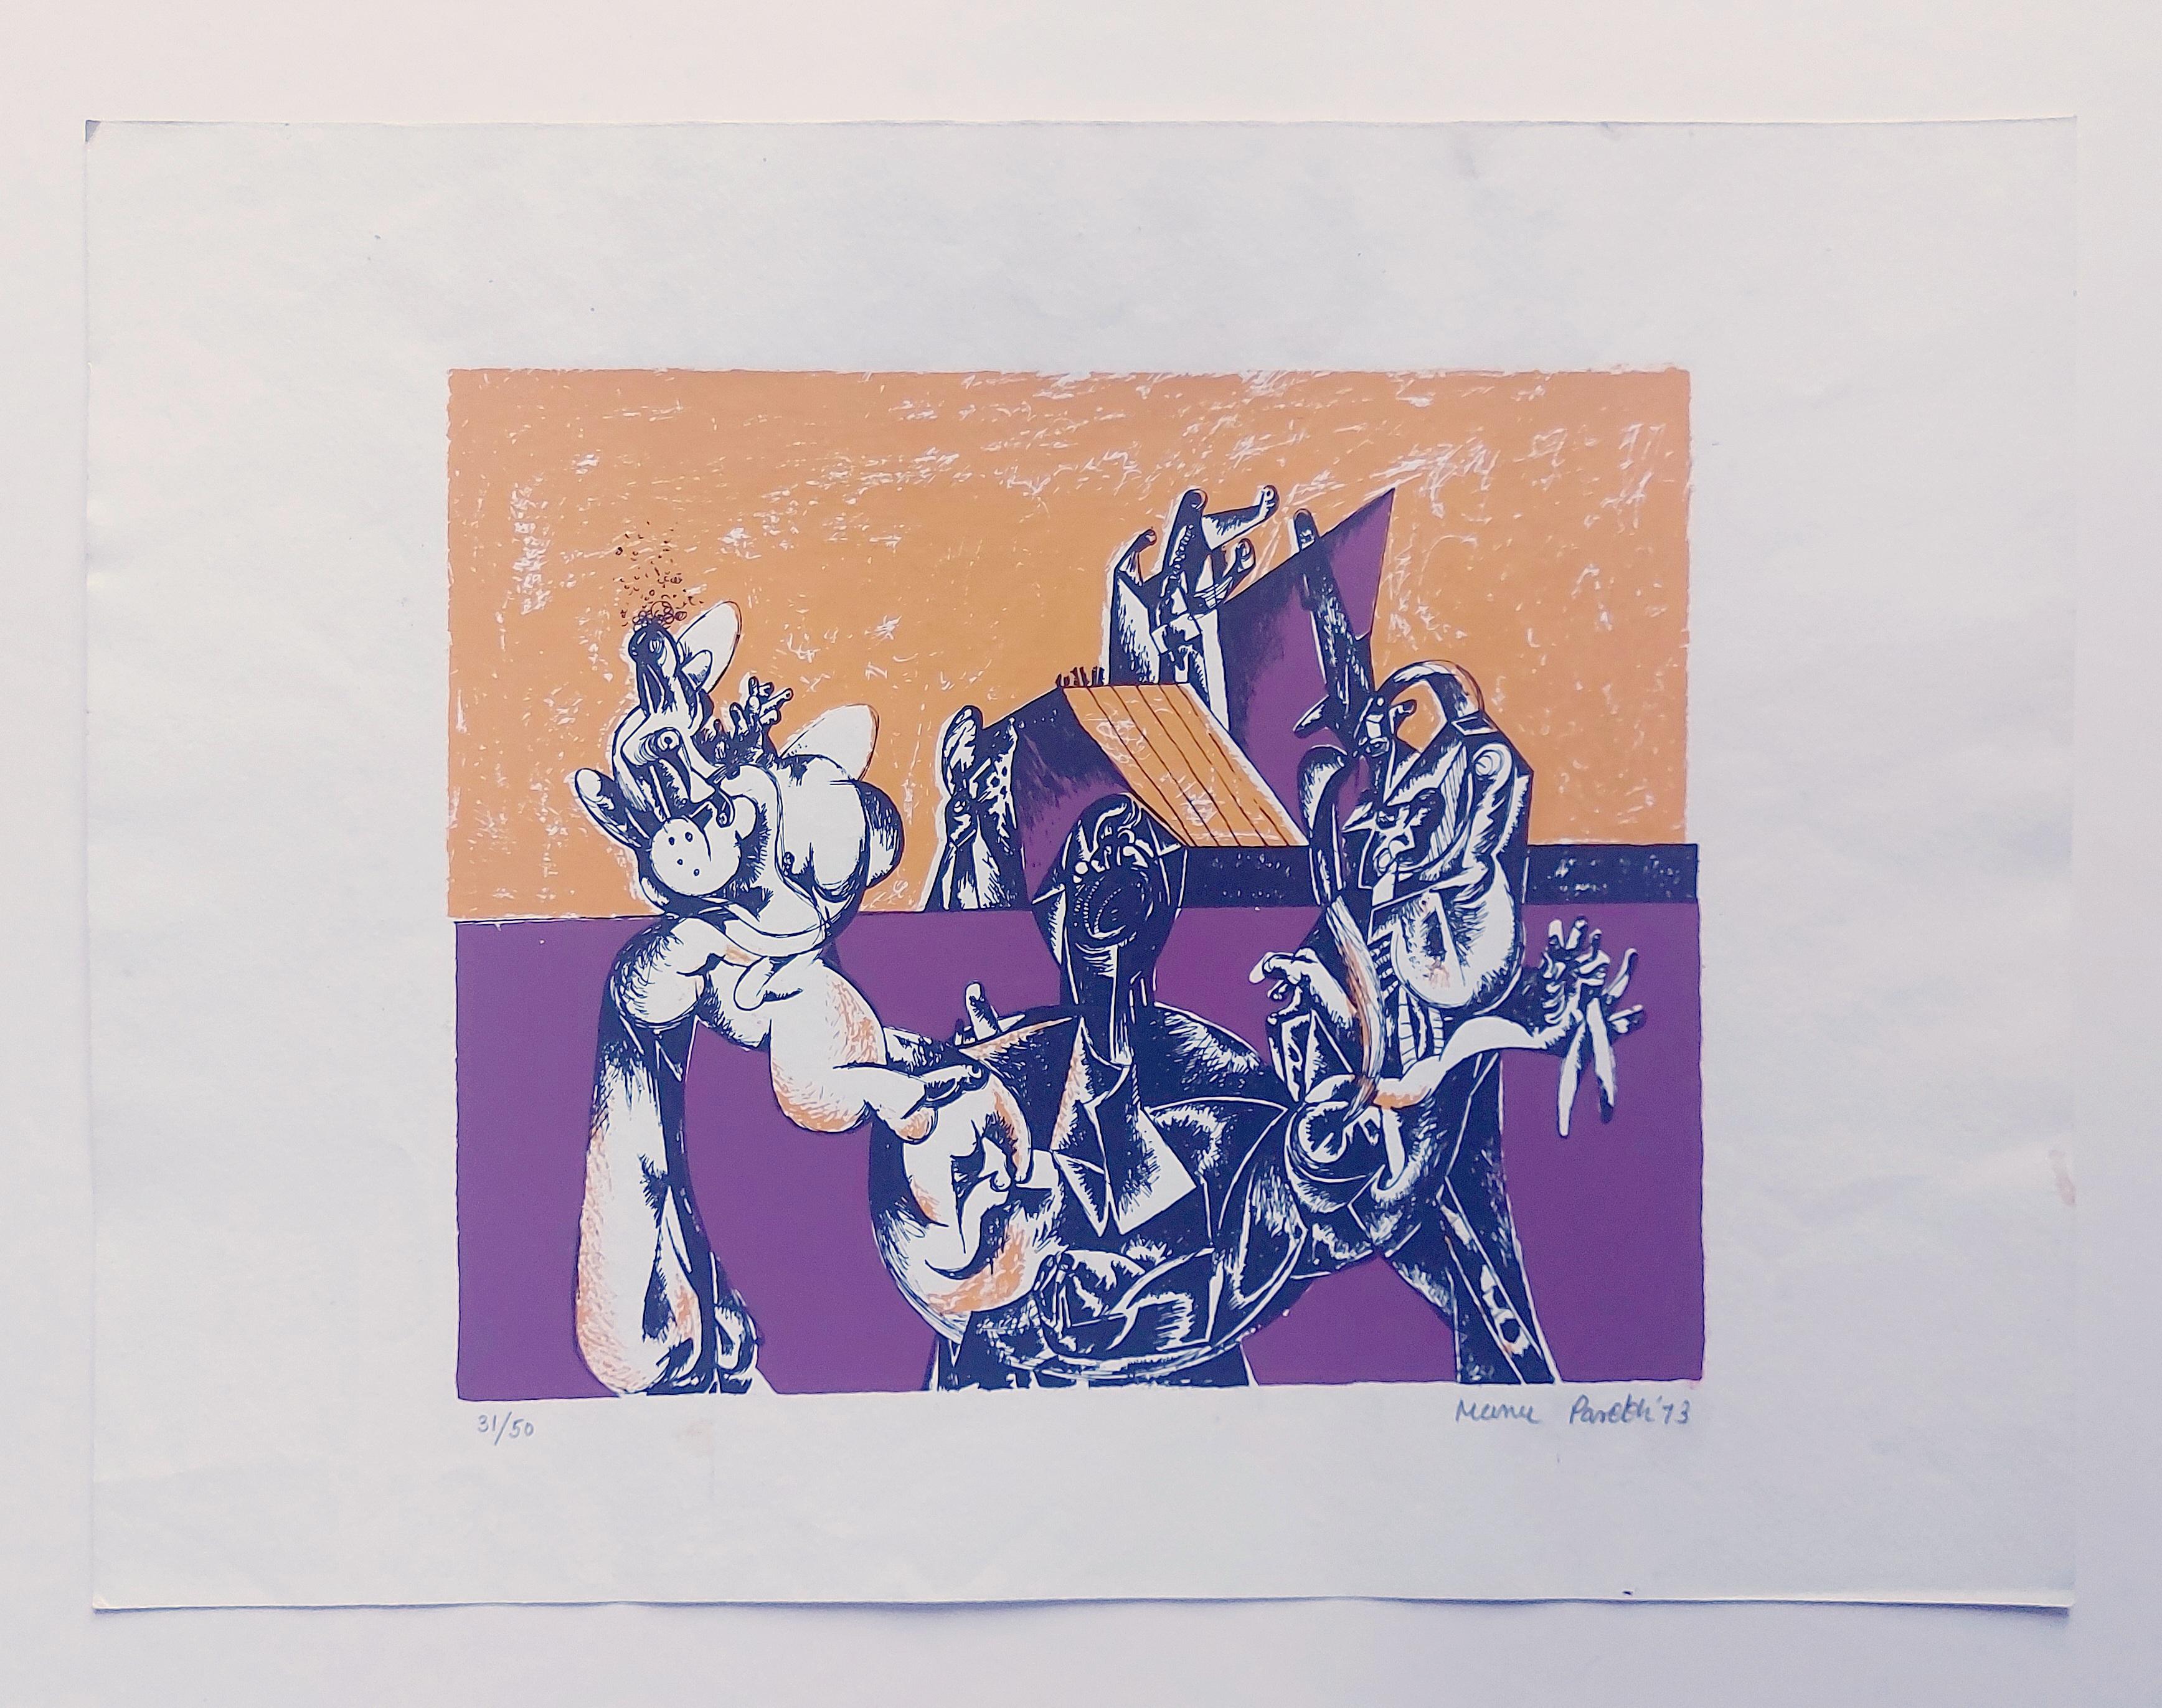 Indian Modern Art Master Limited Edition Colour Lithograph Published Work - Print by Manu Parekh